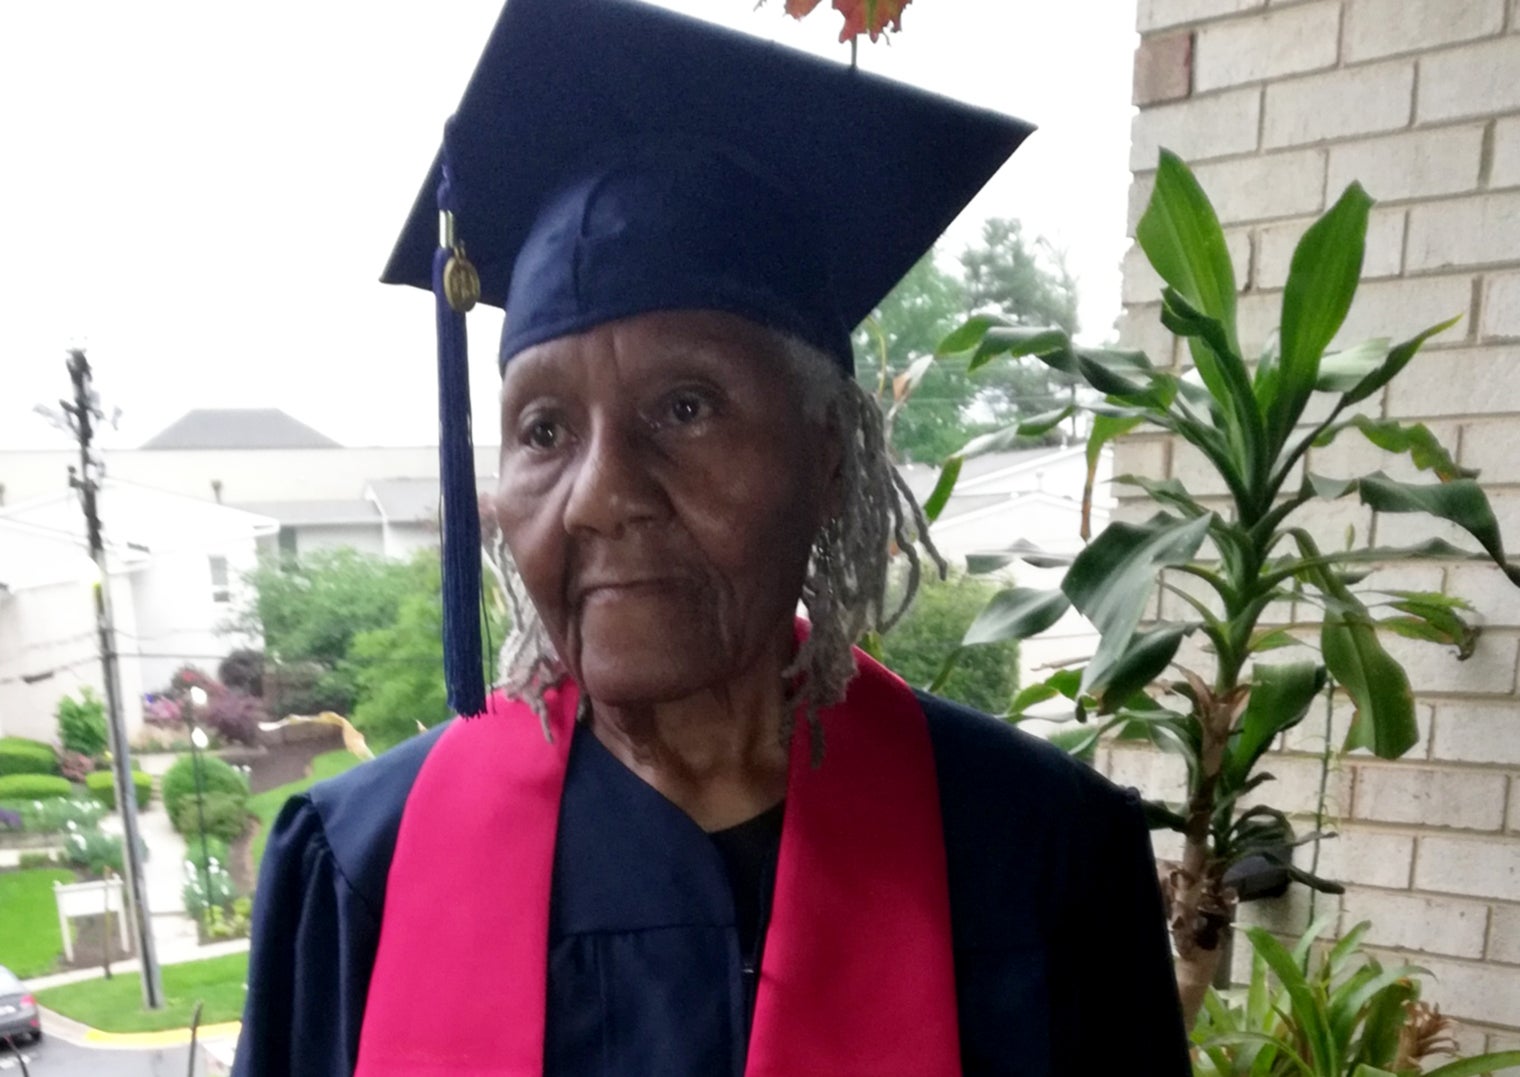 An 89-Year-Old Woman Just Earned Her First Degree, Plans To Pursue Another
